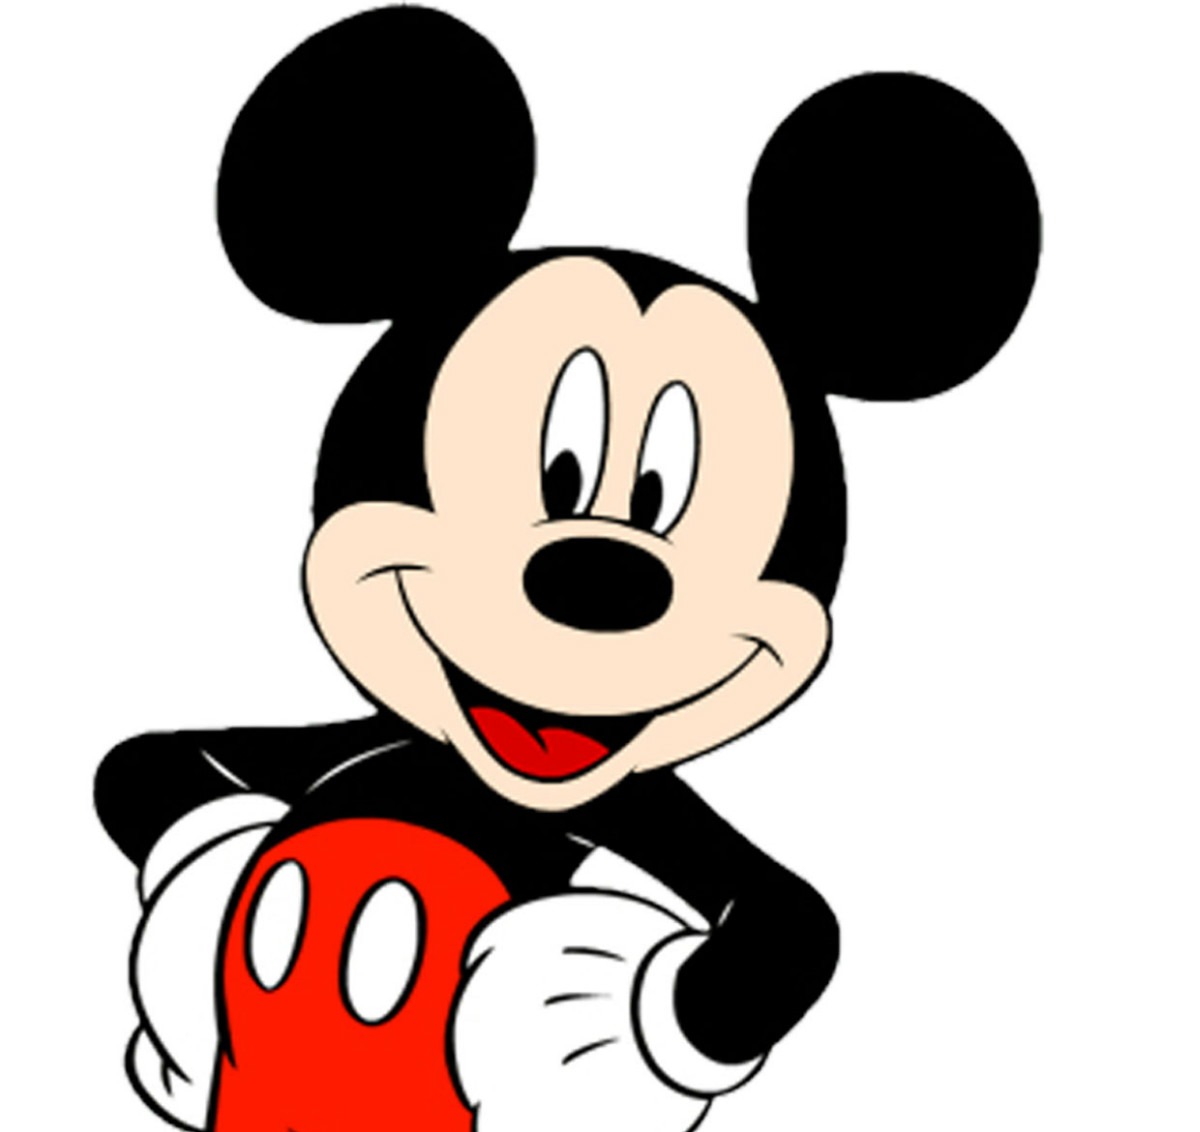 Mickey Mouse Cartoon | Free Wallpapers Pictures